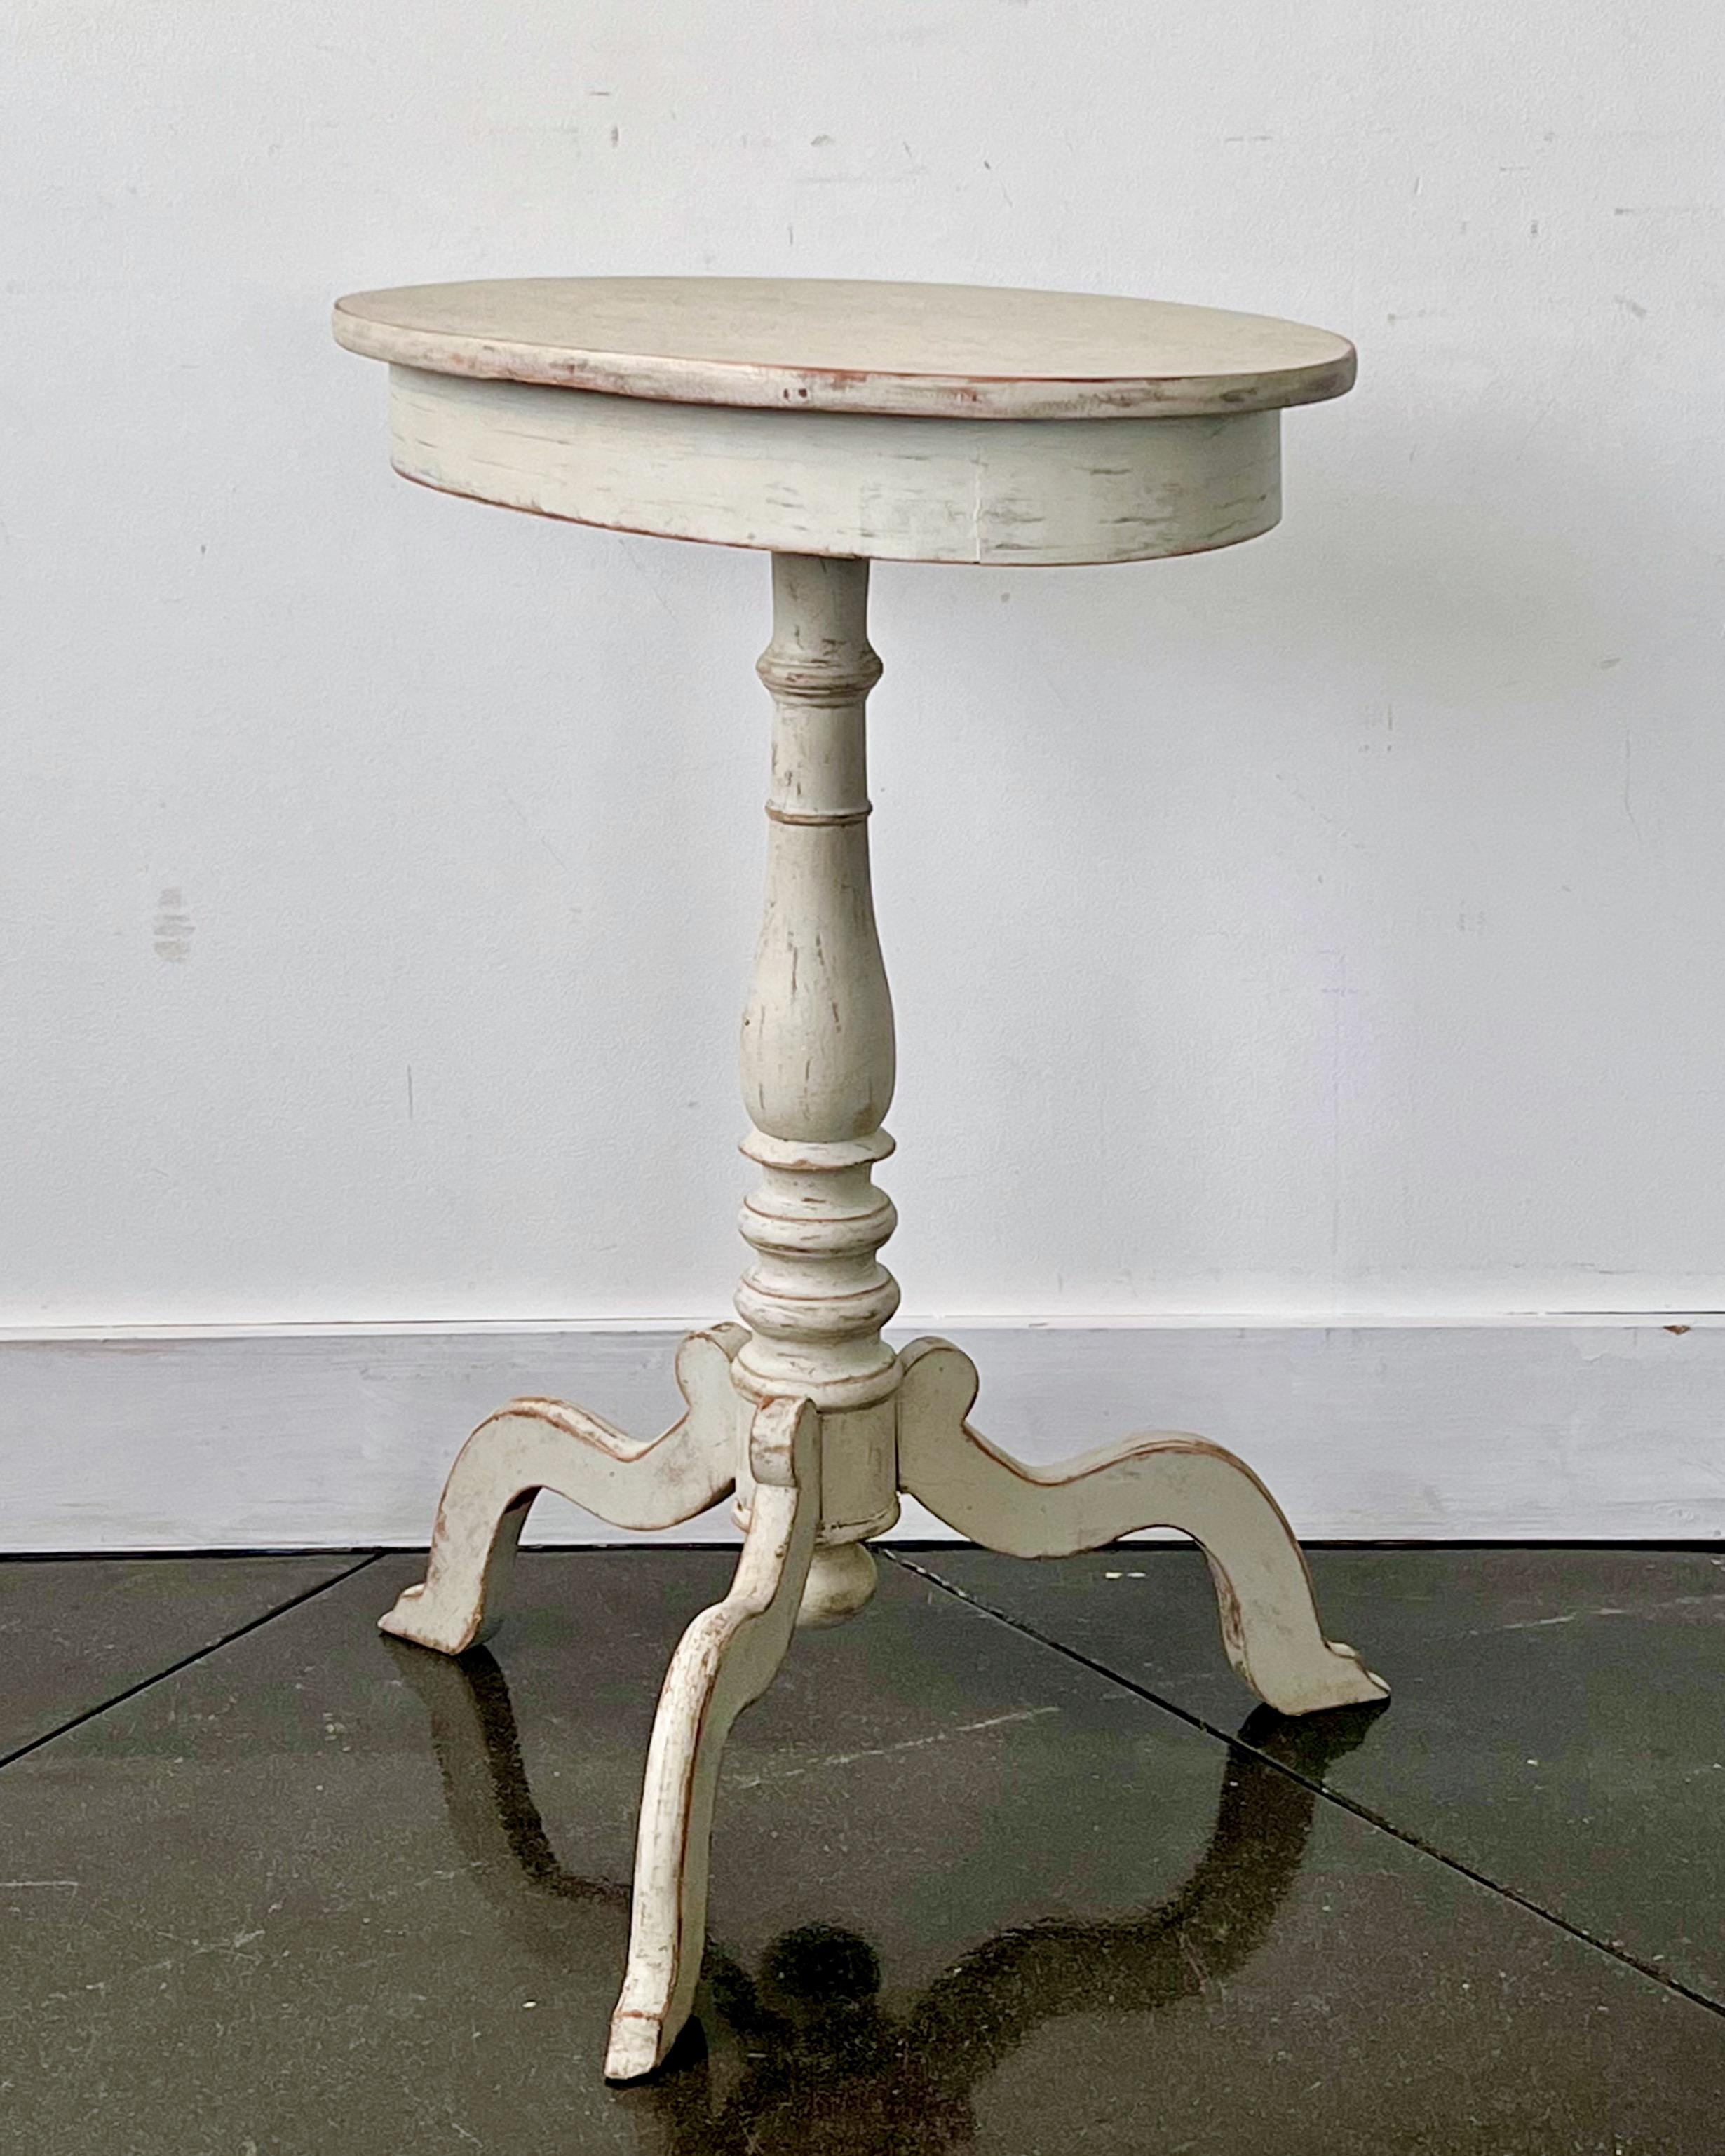 Charming Swedish 1850s painted oval top with wide apron, turned pedestal on elegant carved tripod leg base.